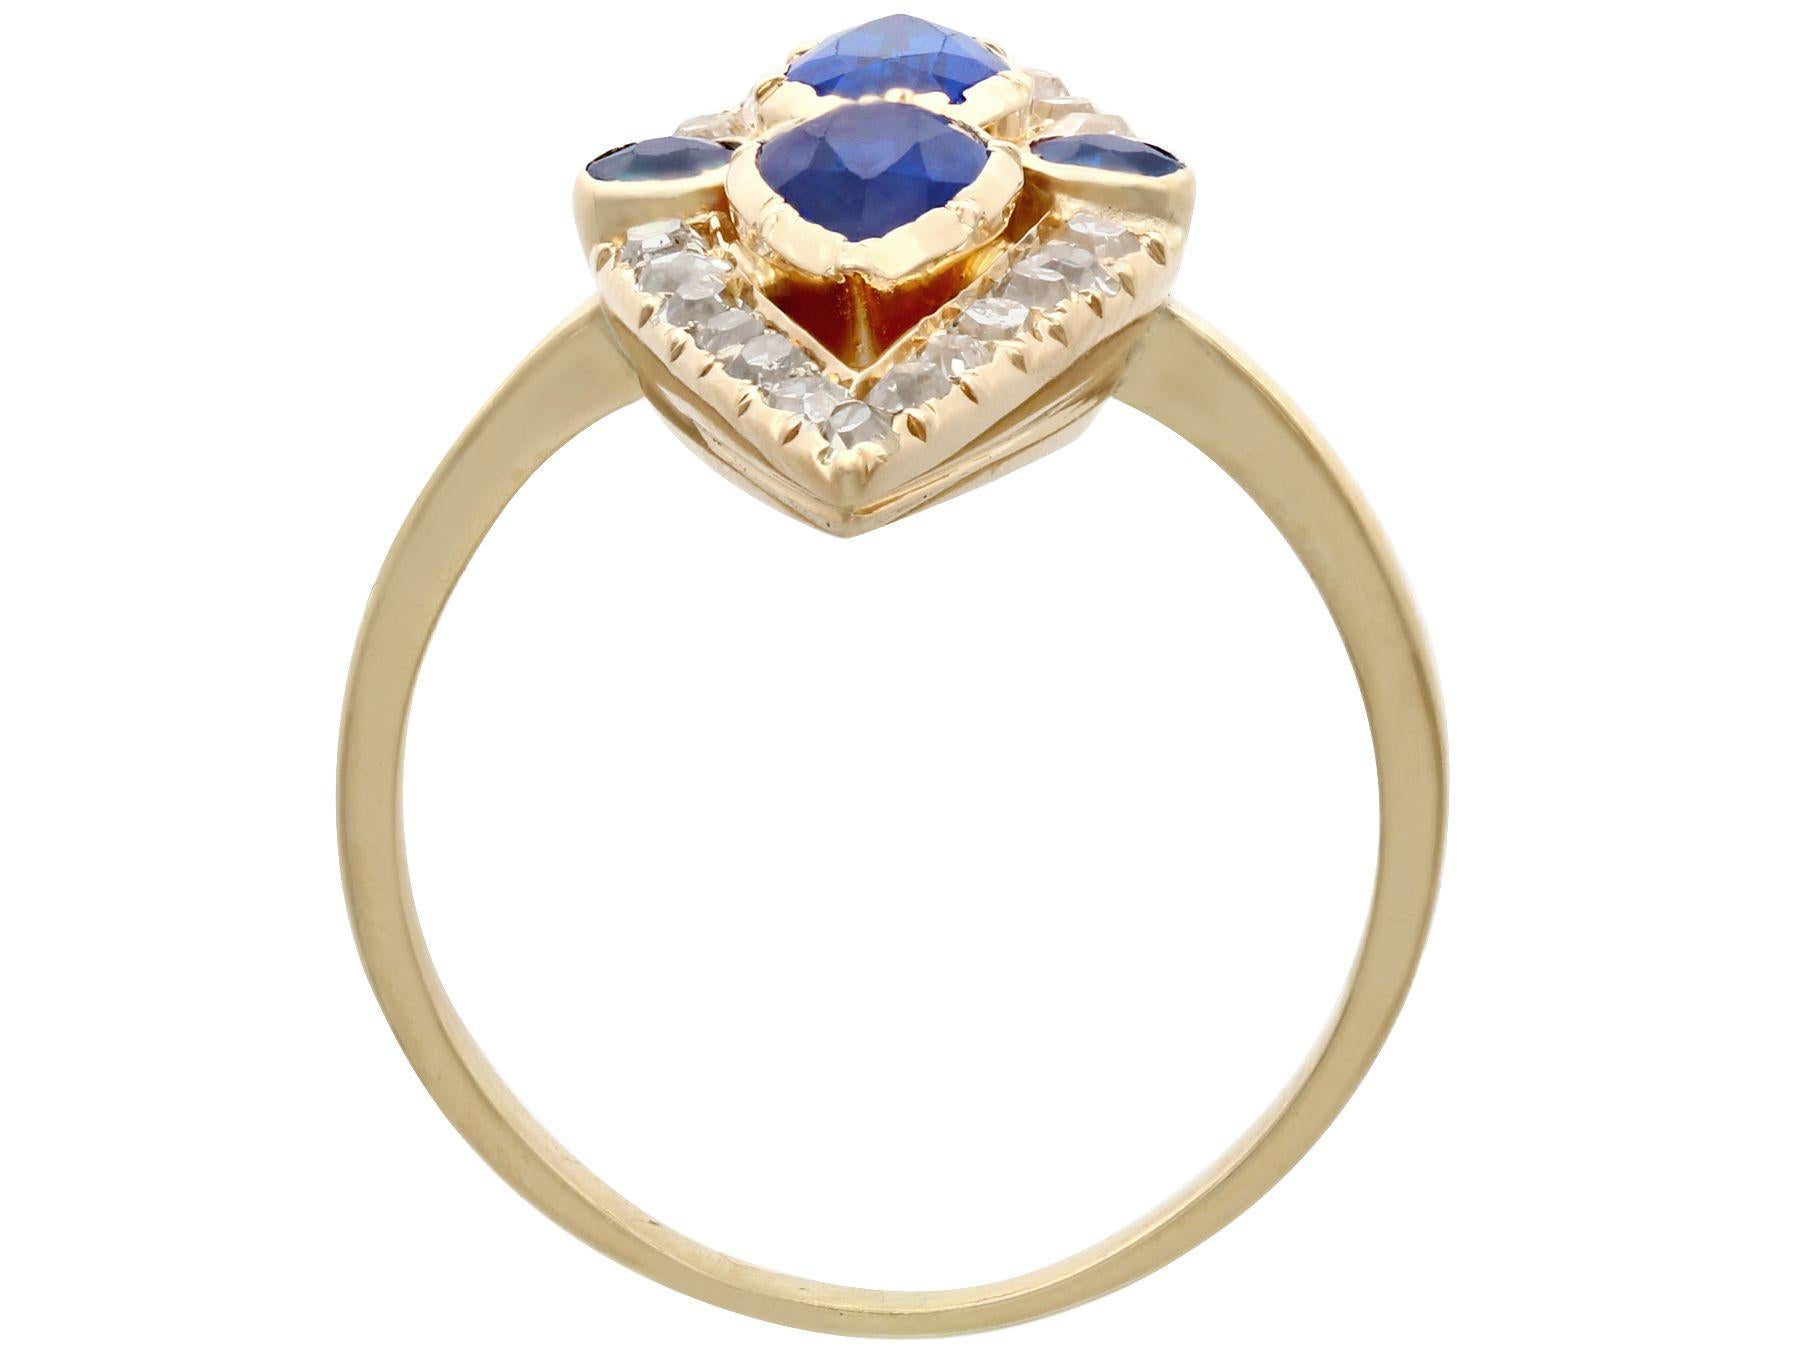 Women's Victorian 1.35 Carat Sapphire and 1.32 Carat Diamond Yellow Gold Marquise Ring